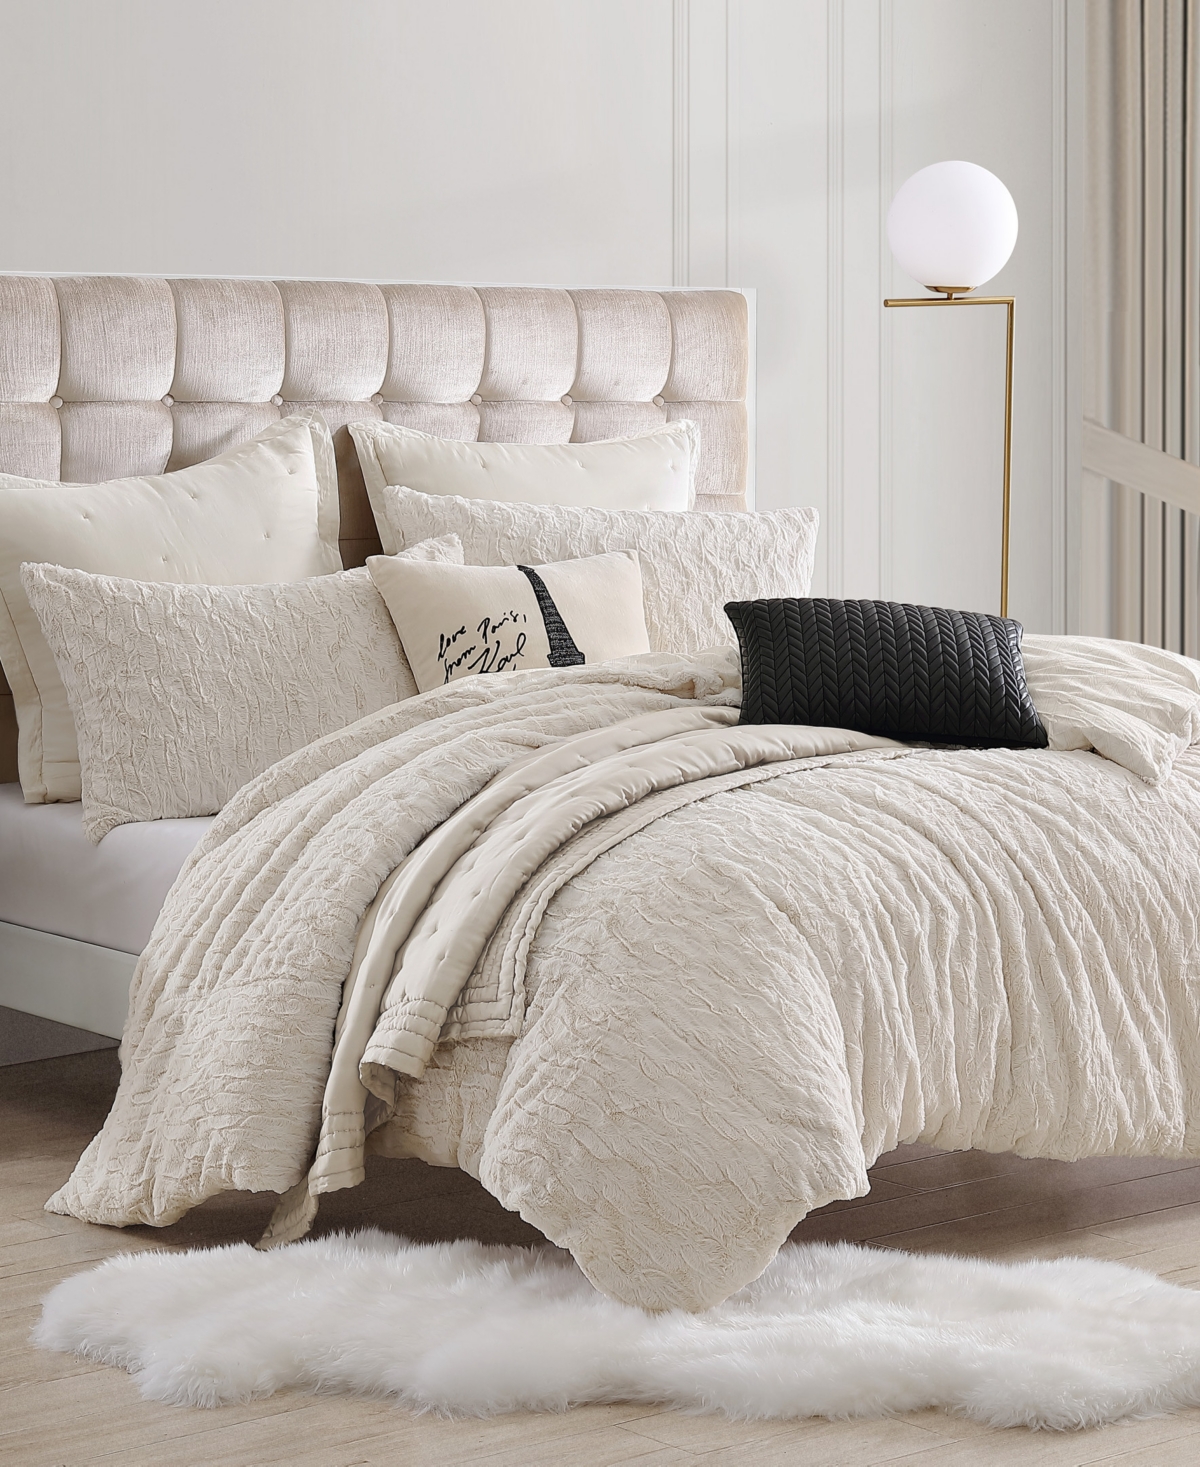 Karl Lagerfeld Soft And Warm Heavenly 3 Piece Duvet Cover Set, King In Ivory